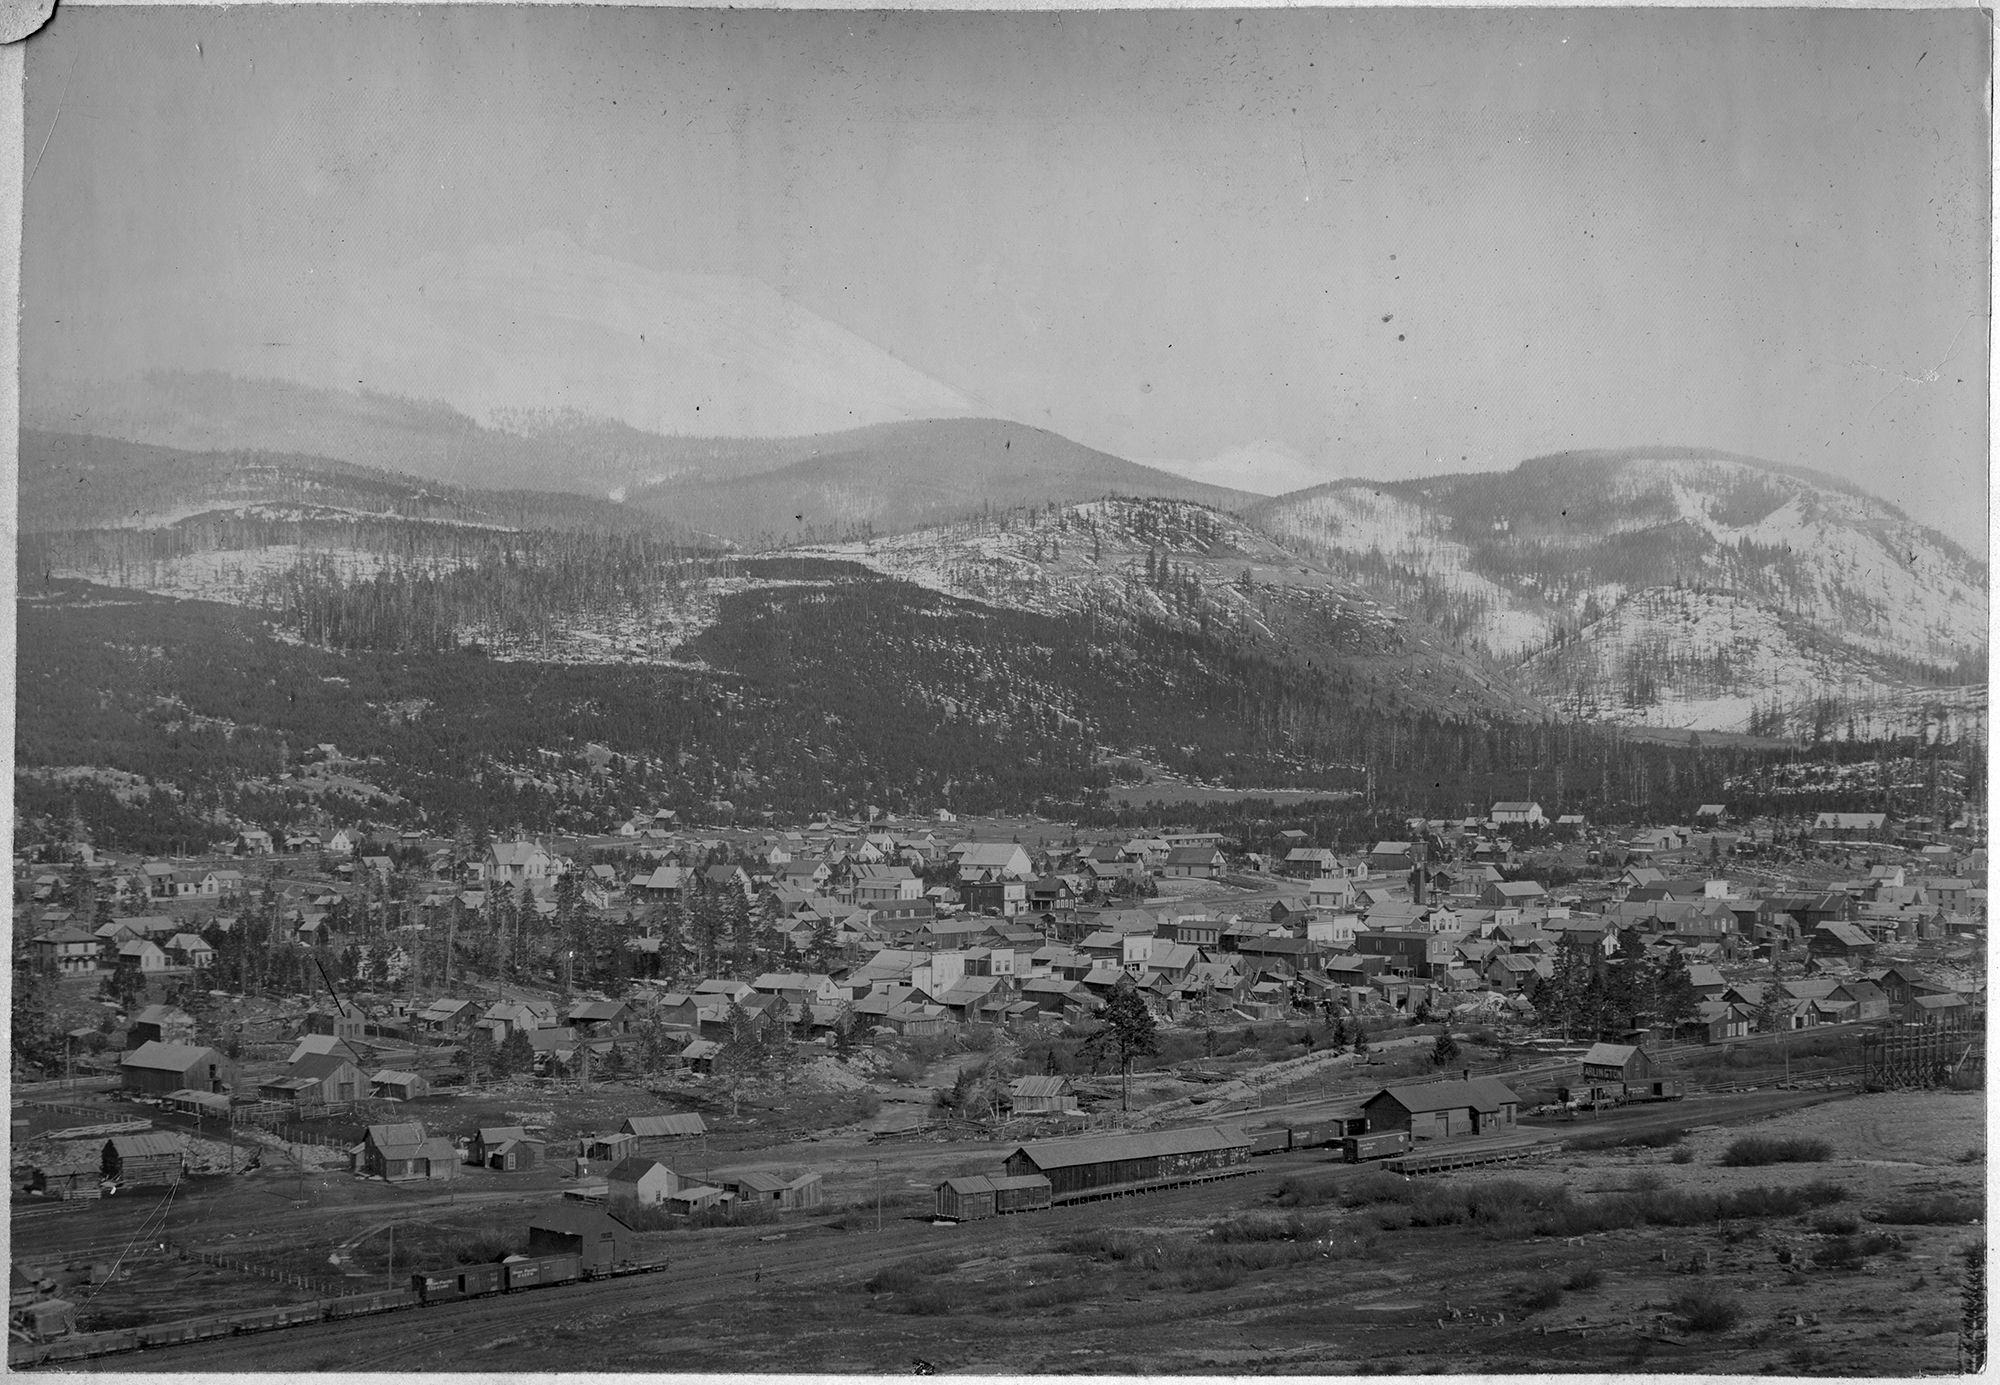 Town of Breckenridge Colorado in the late between 1880s-1890s